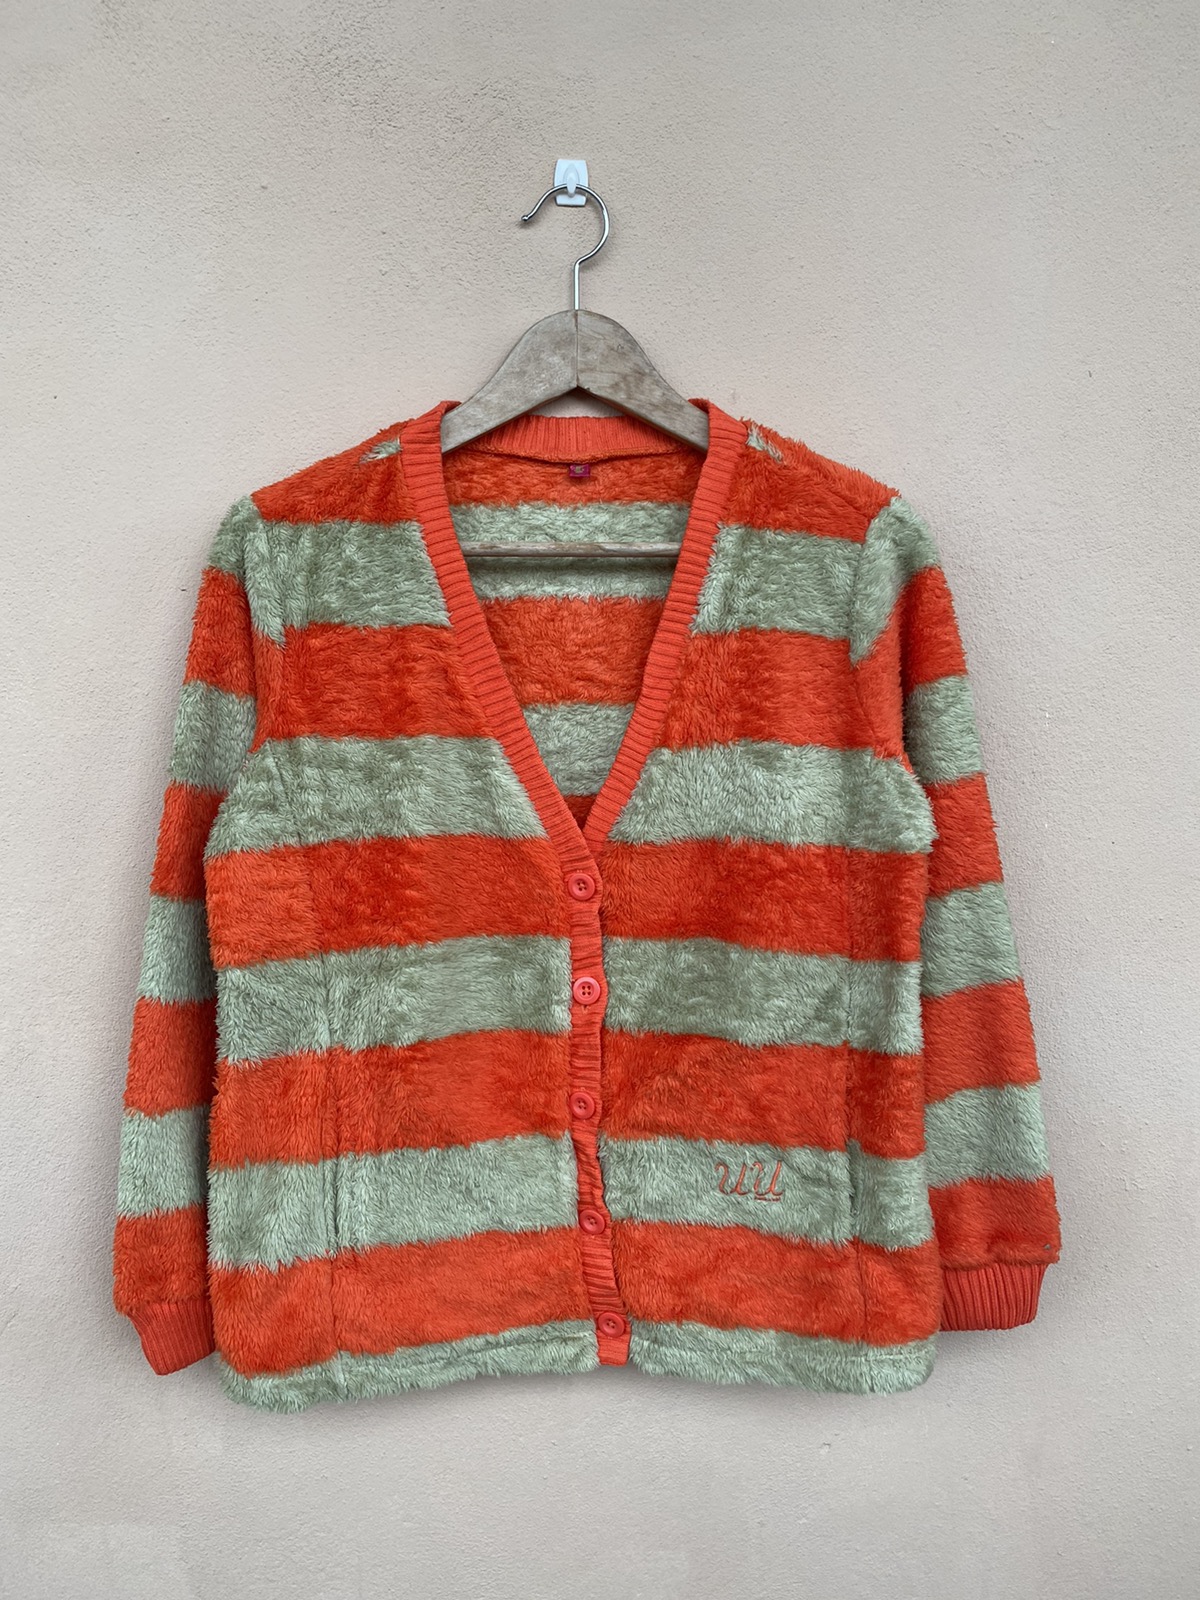 Cardigan Stripped Uniqlo X Undercover Very Nice Colour - 1